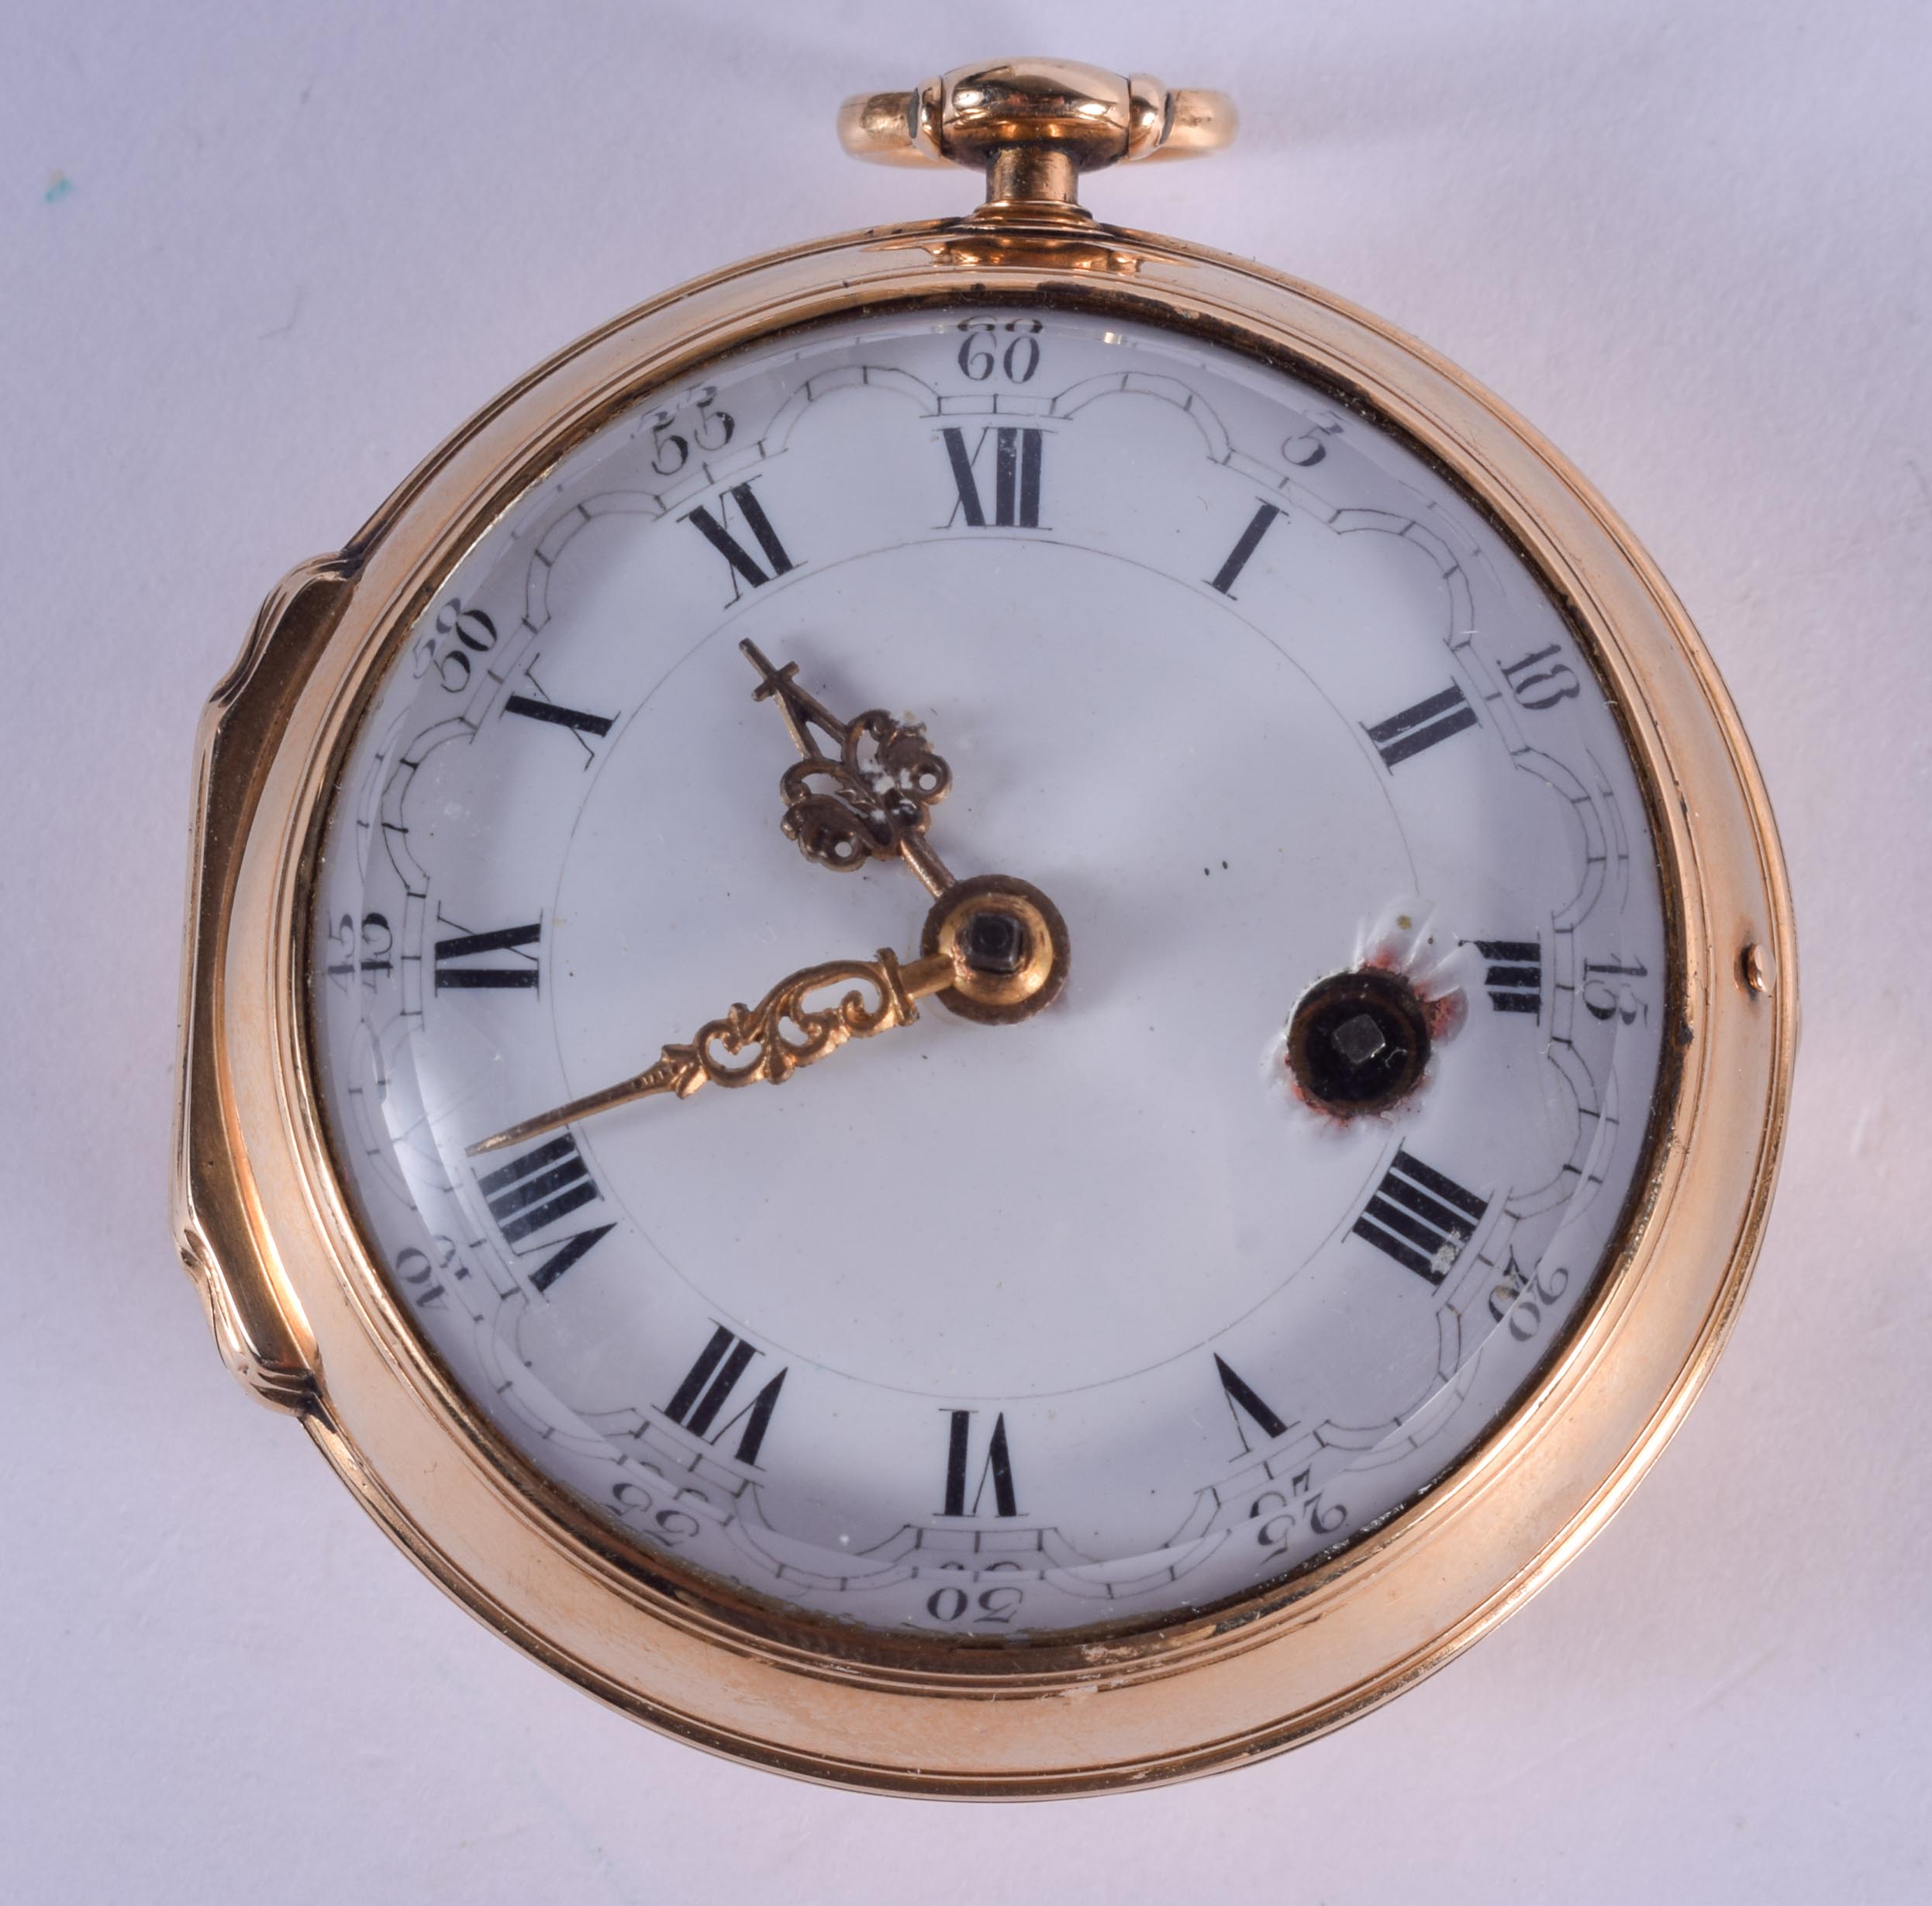 A GOOD ANTIQUE 18CT GOLD HALF HUNTER POCKET WATCH. 89.8 grams overall. 4.5 cm wide.